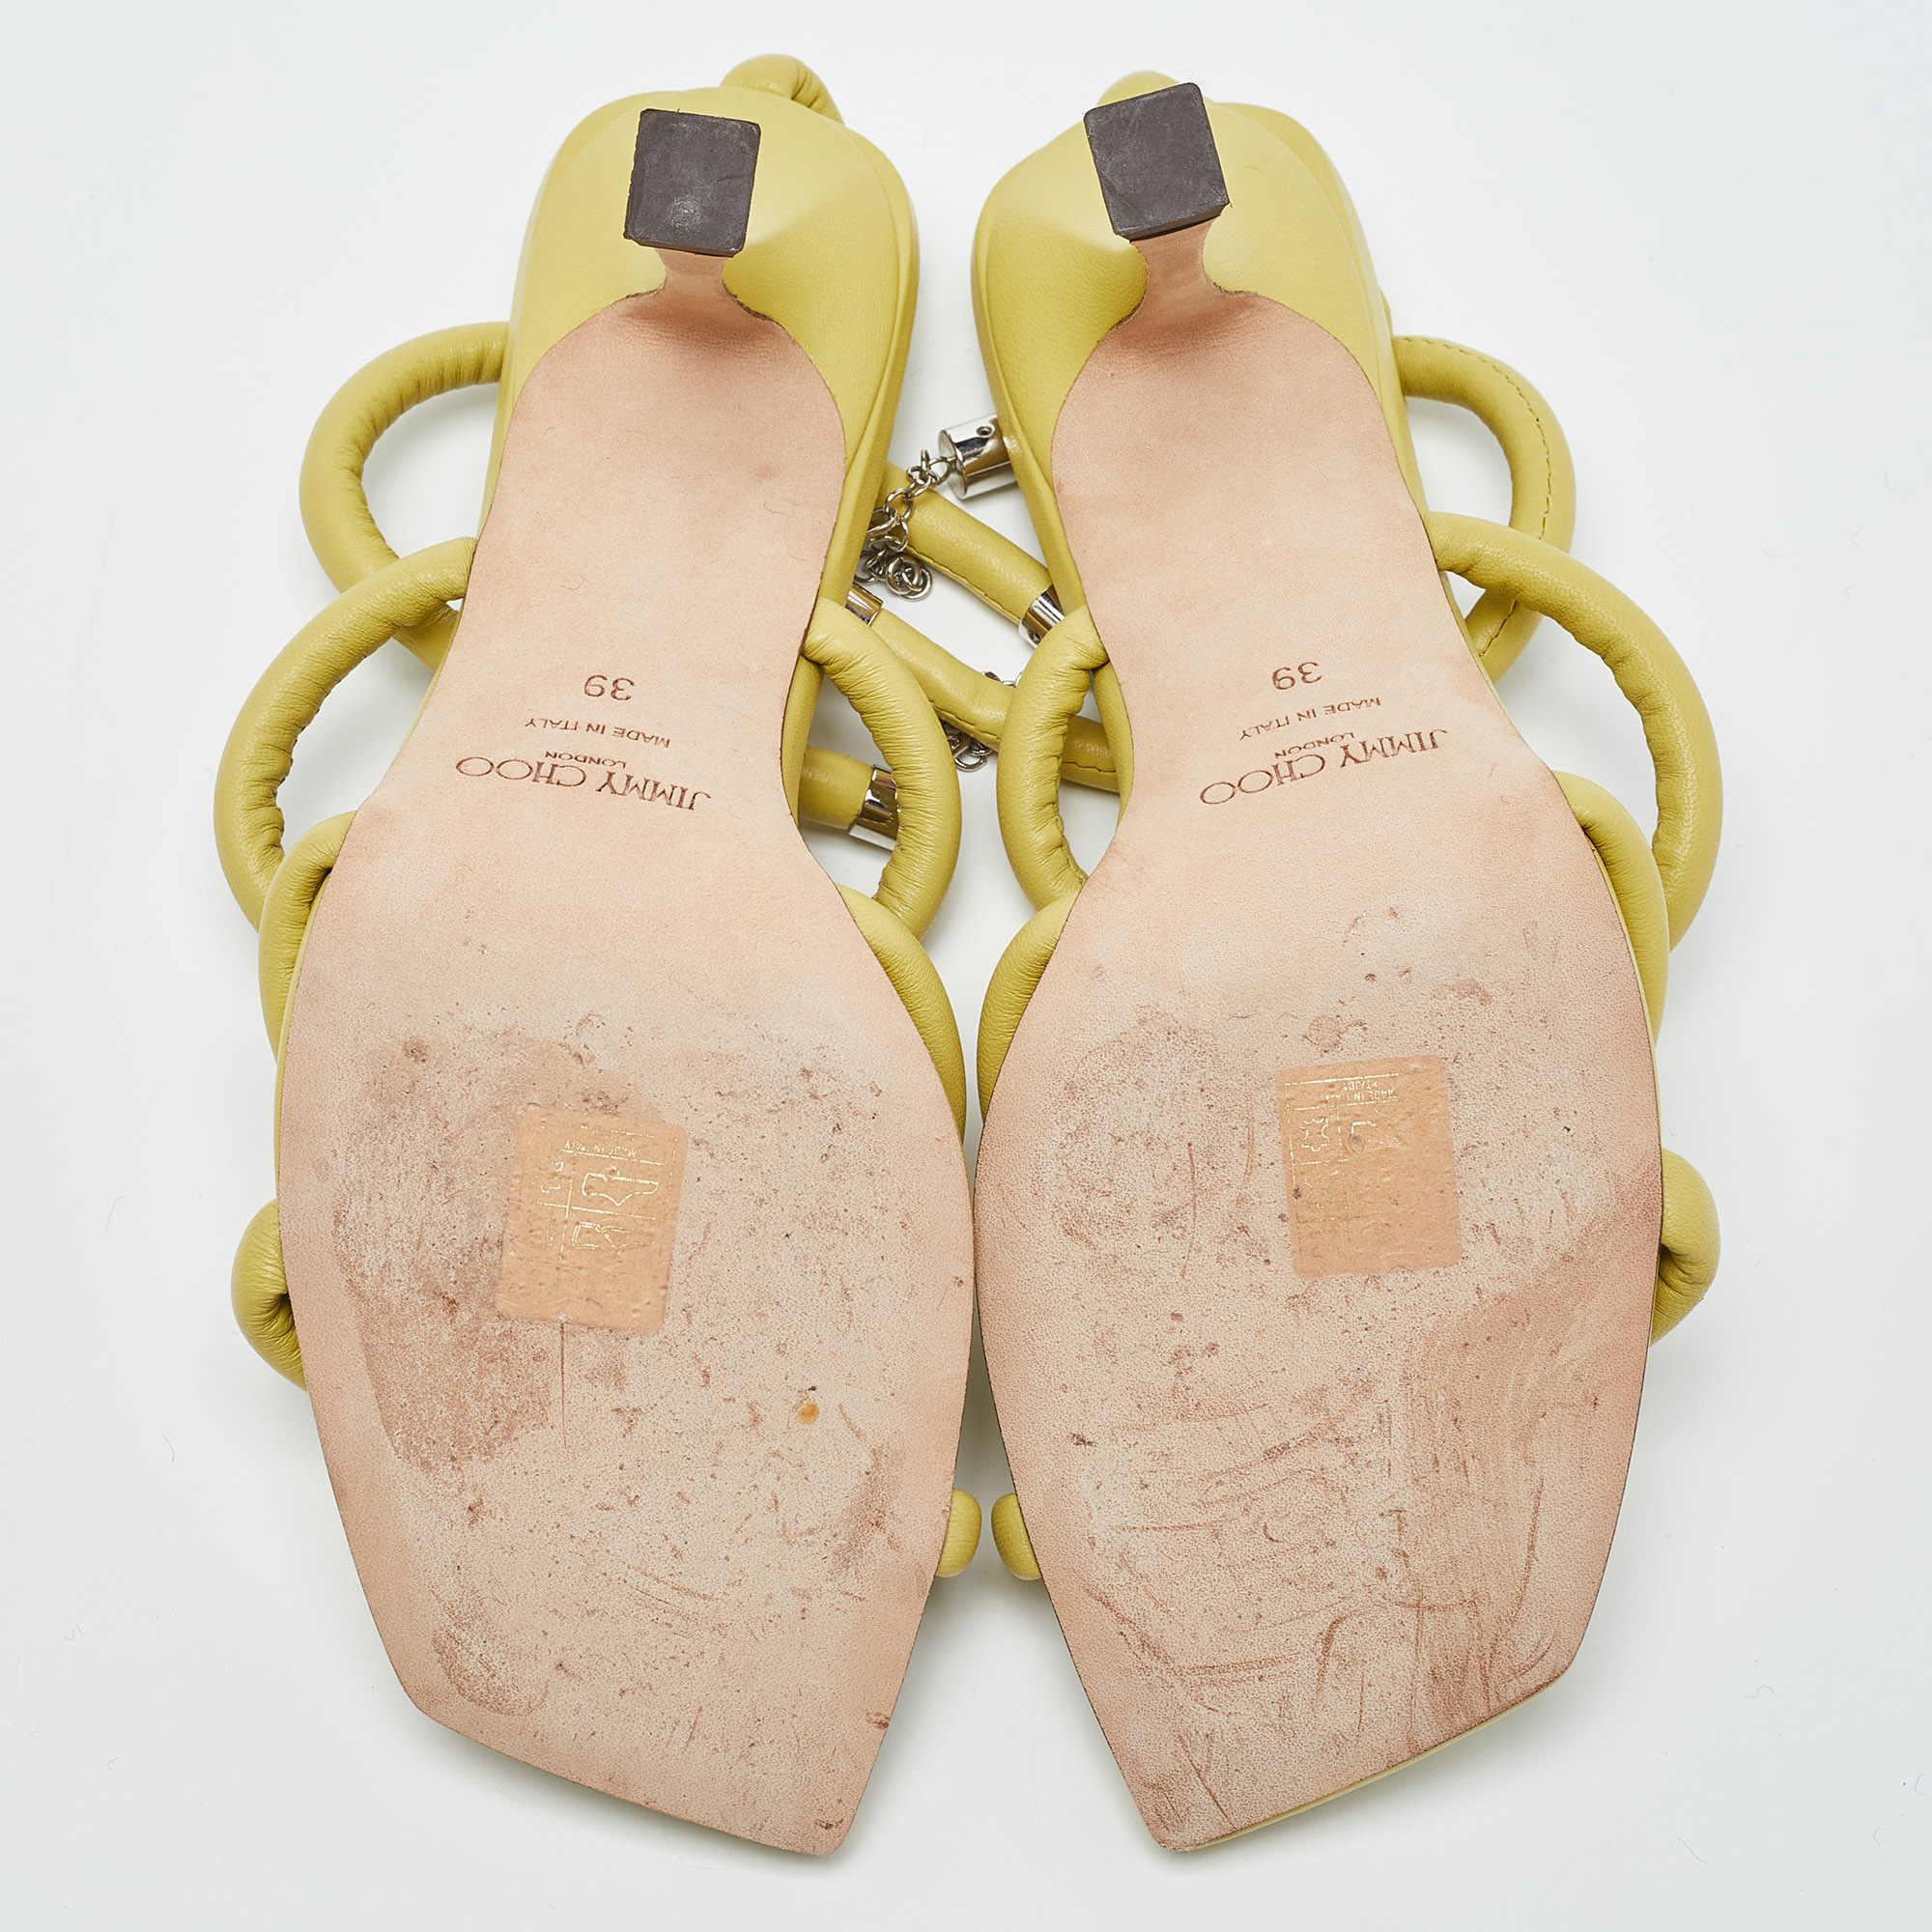 Jimmy Choo Yellow Leather Bay Sandals Size 39